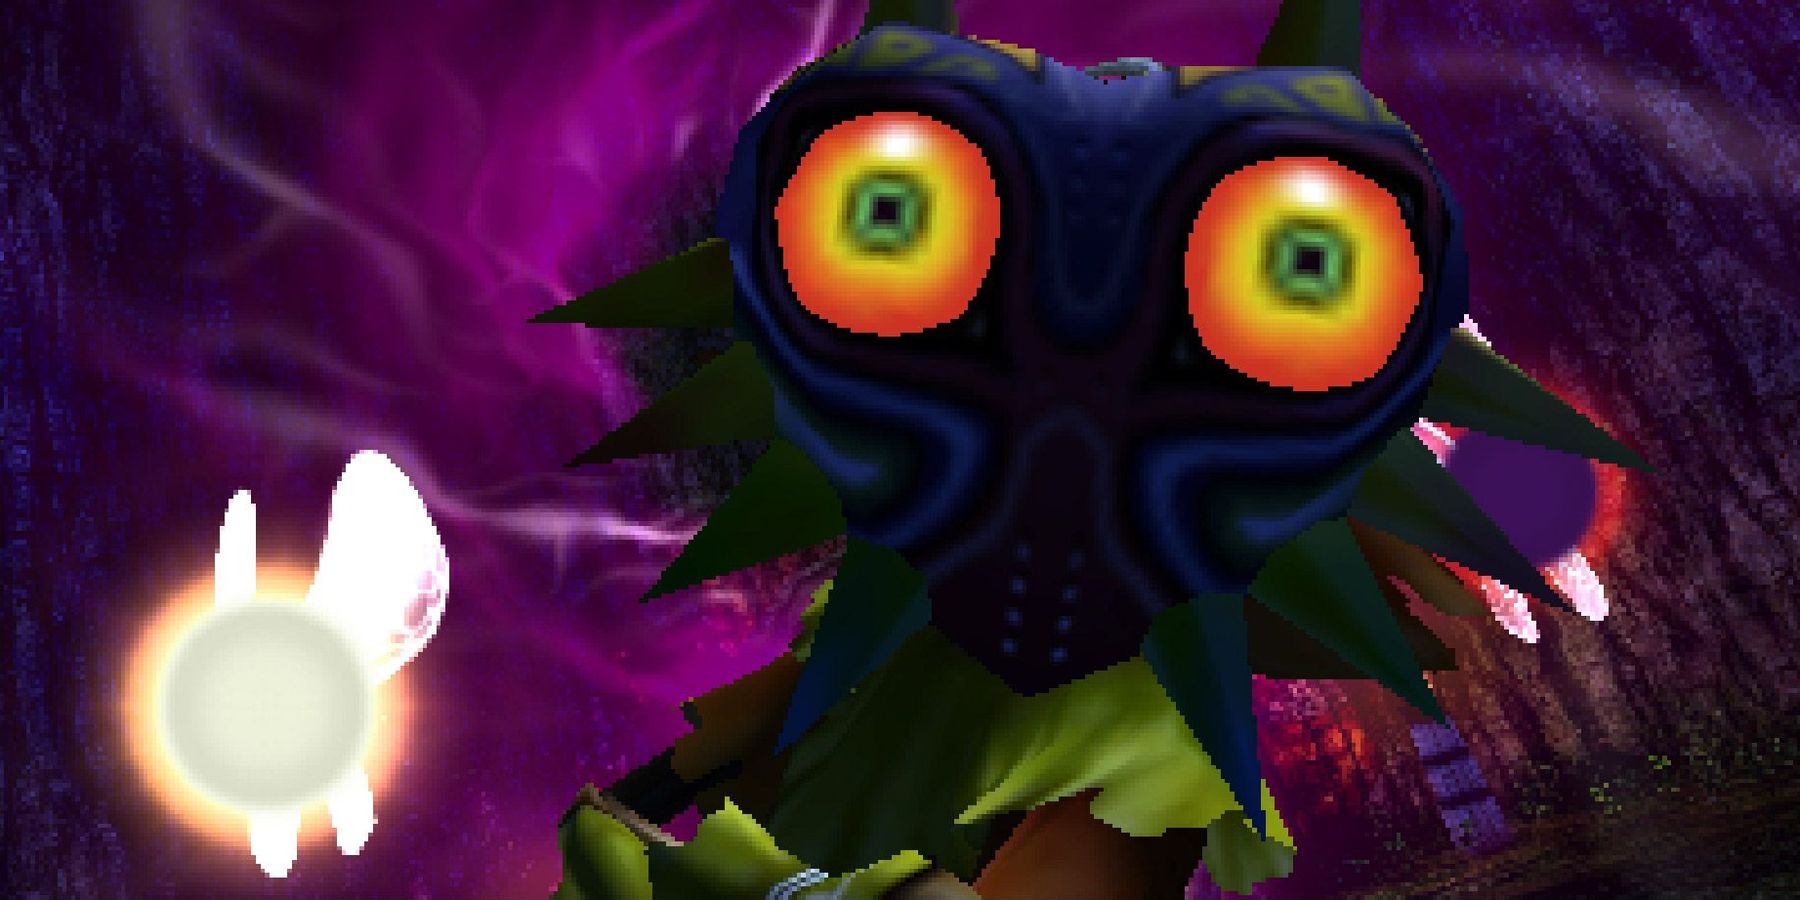 Gamer Finds A Massive Majora’s Mask for Sale in a Mexican Market